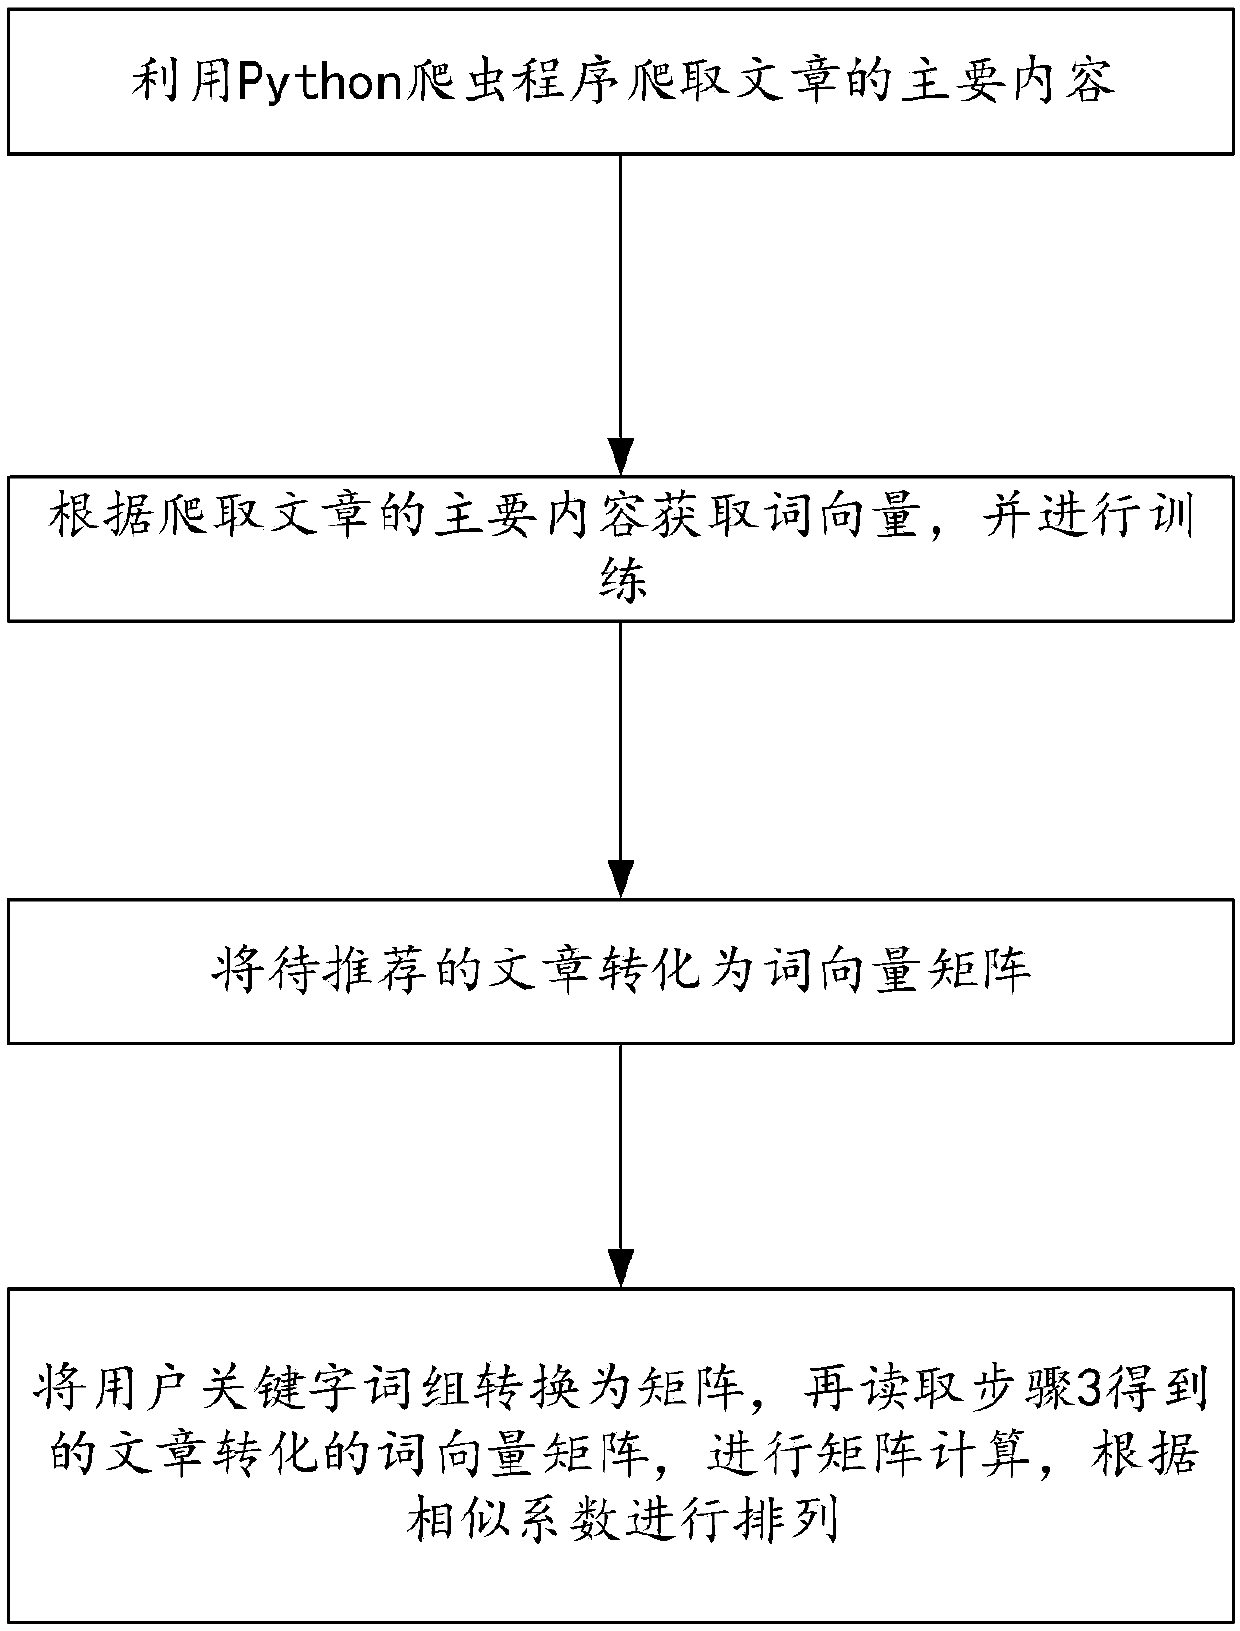 Article recommendation method based on Chinese similarity calculation